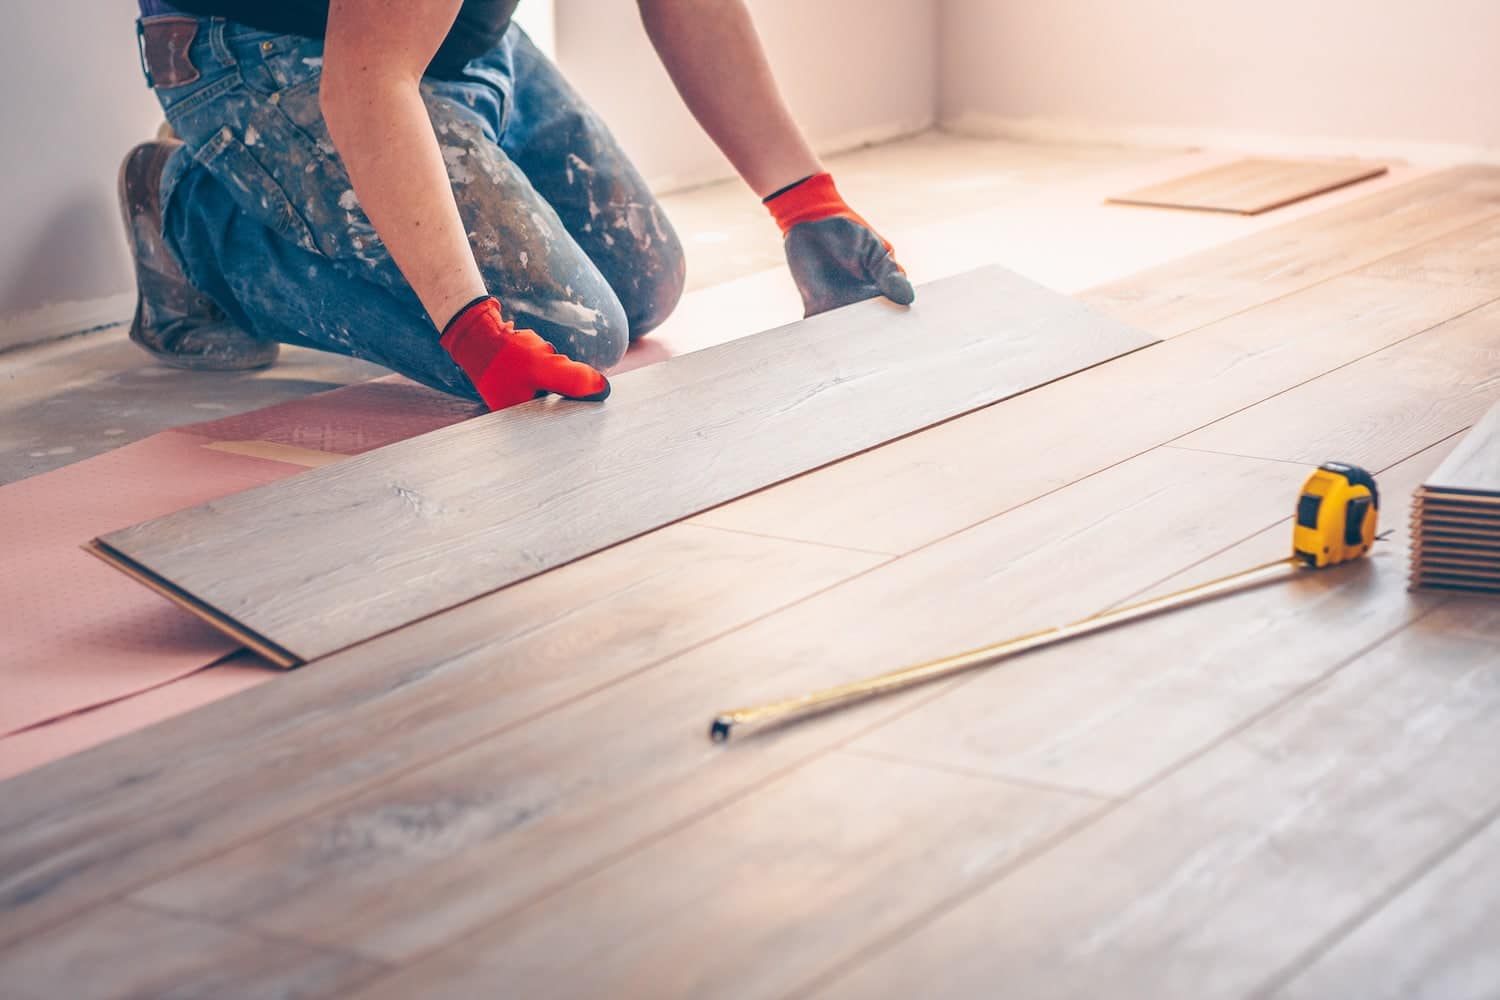 How To Remove Hardwood Floor Without Damage